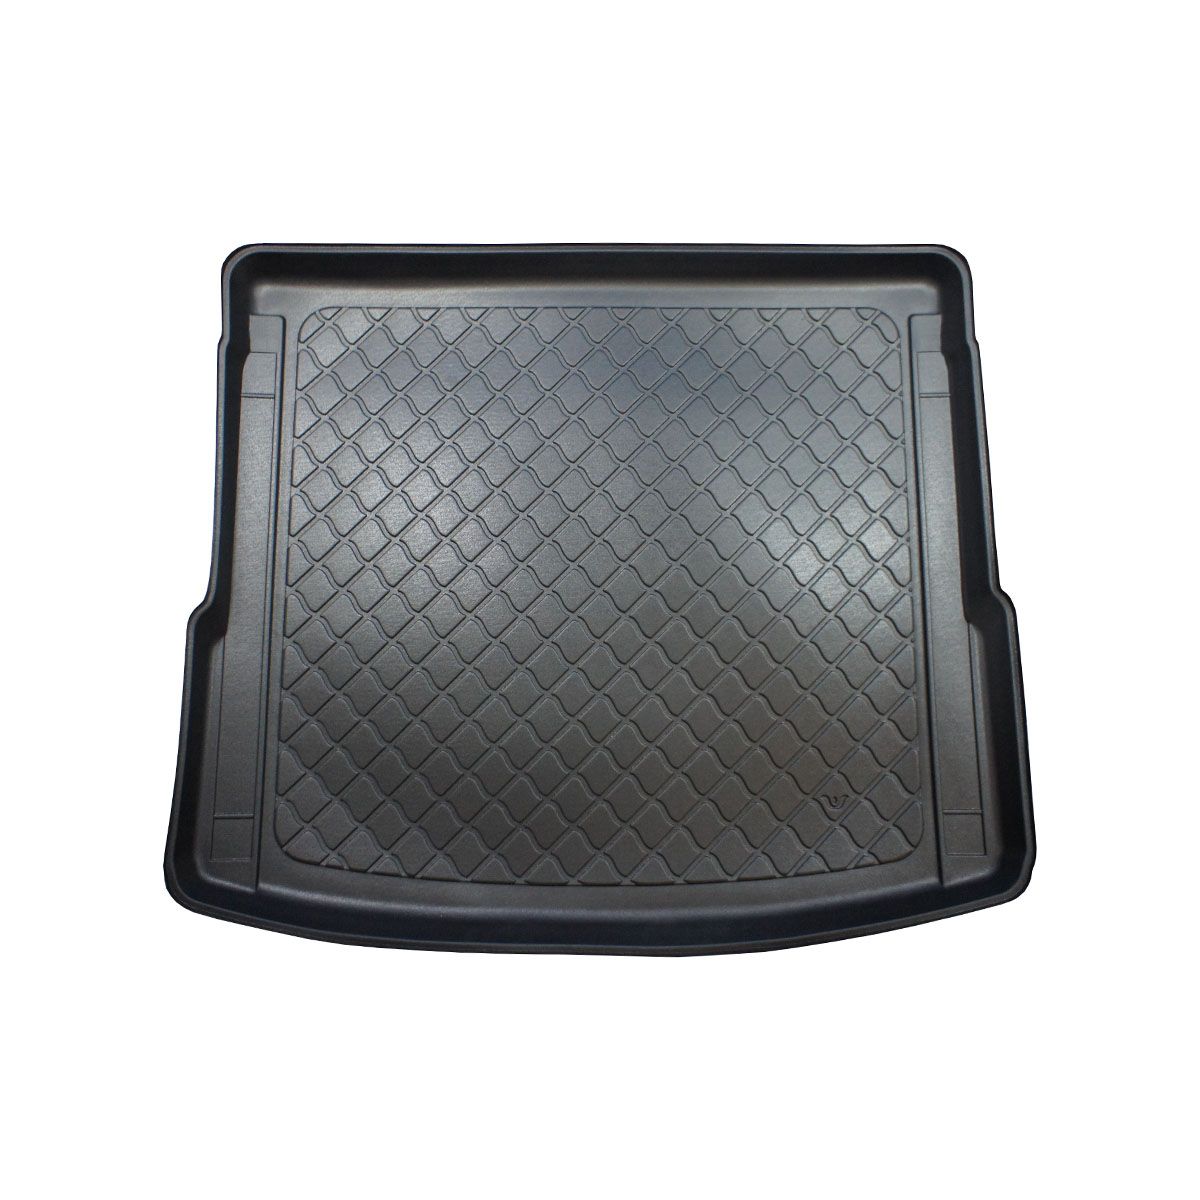 Audi Q5 2017 onwards (80A) Moulded Boot Mat product image